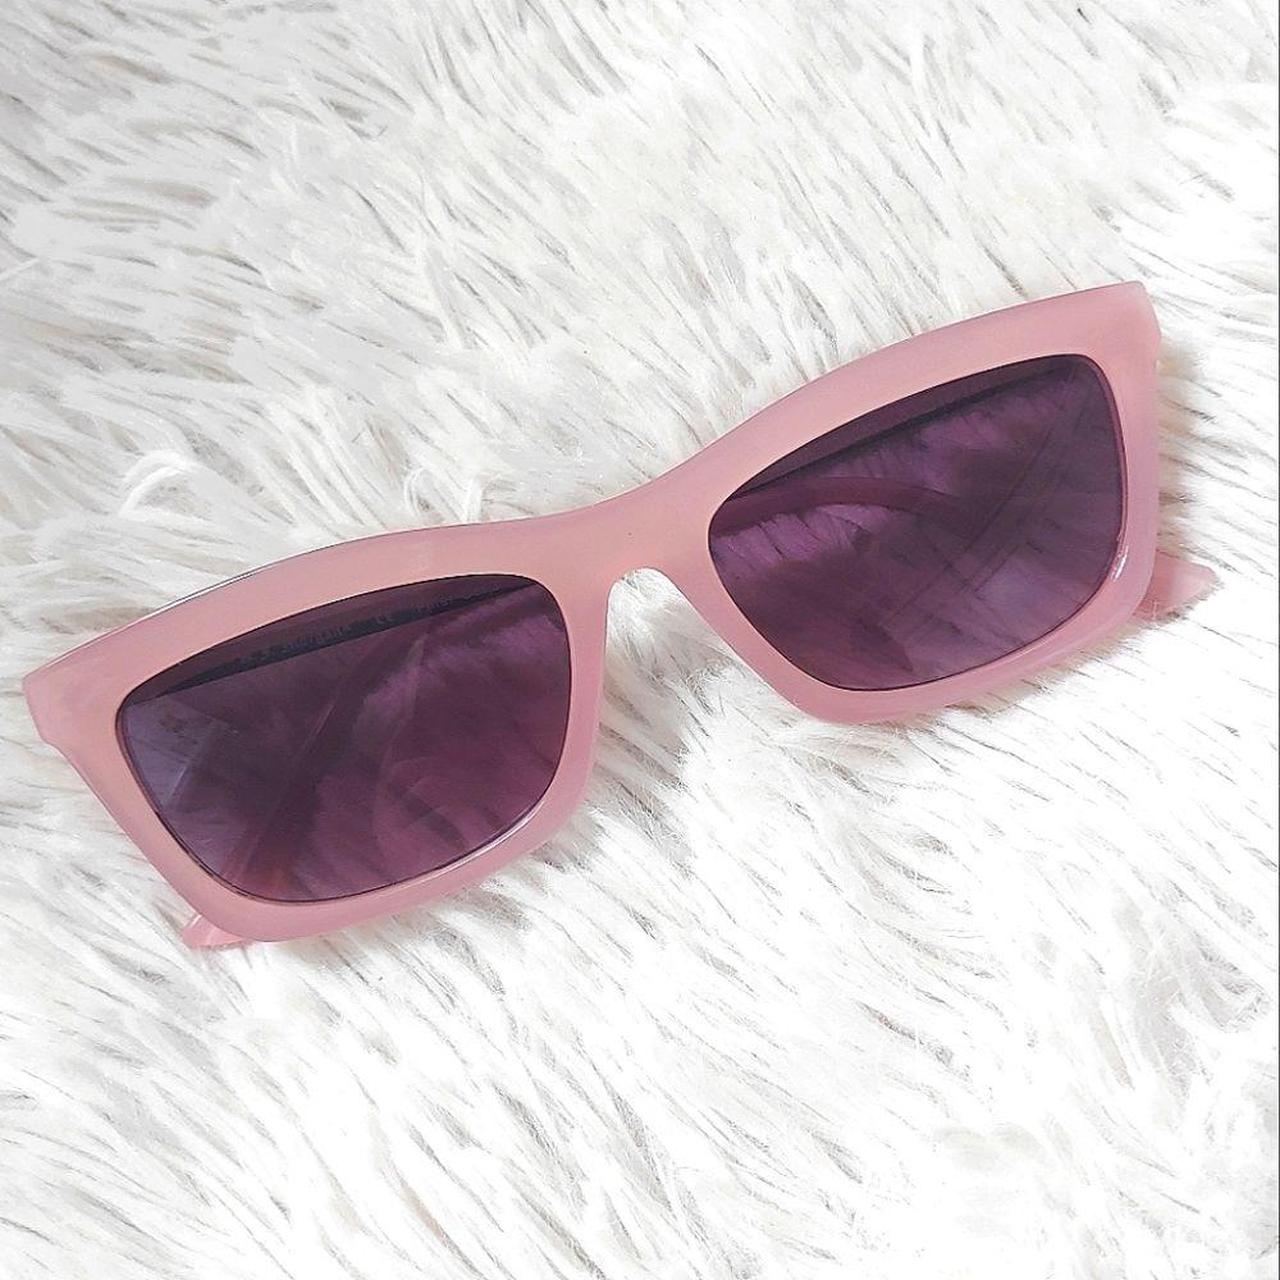 Product Image 1 - A.J. Morgan sunglasses!

Pink frames with